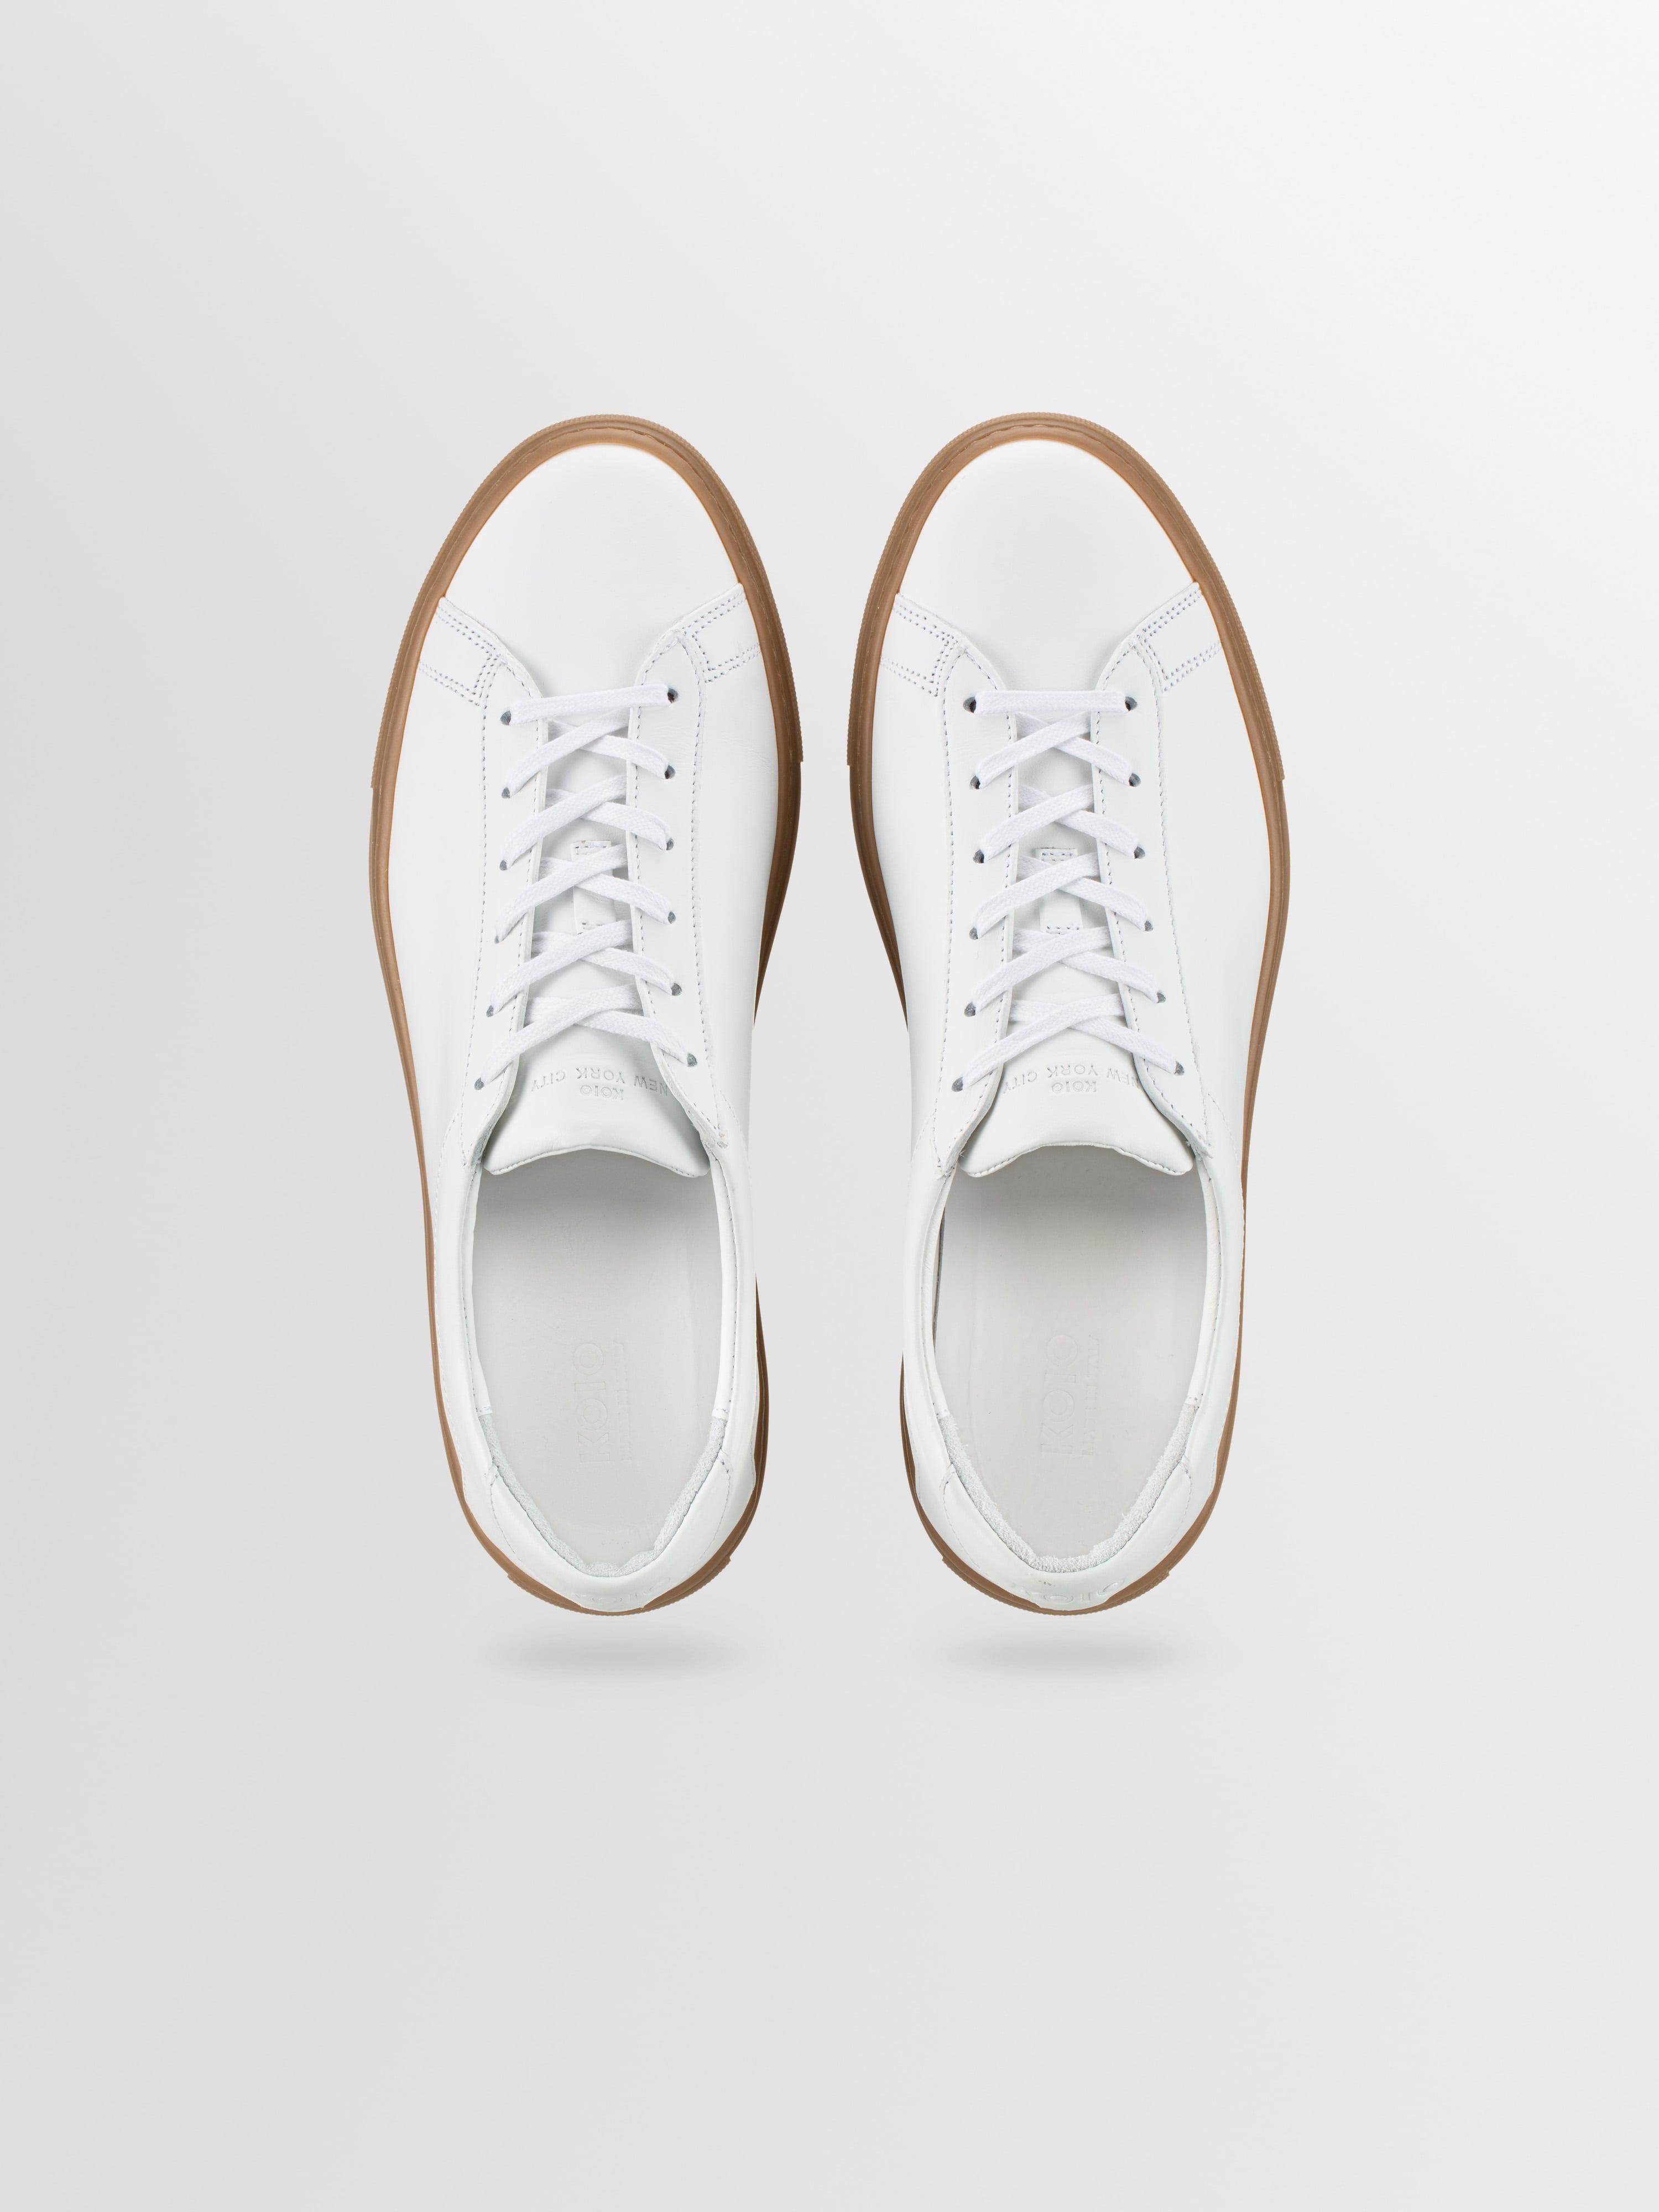 ASOS High Top Sneakers In White With Gum Sole | ASOS